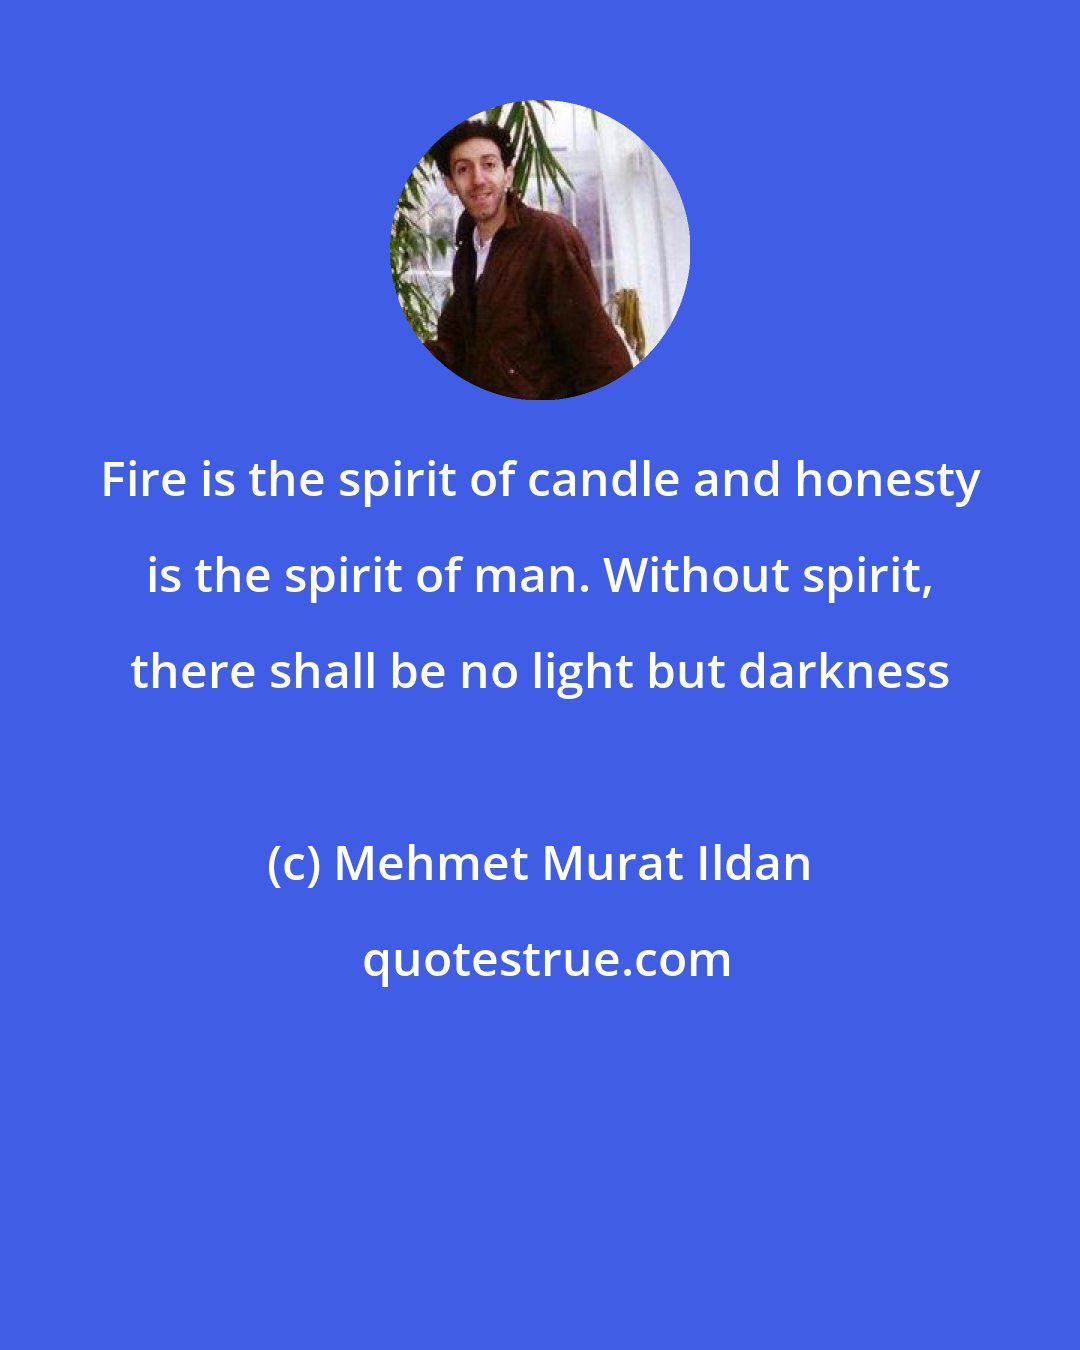 Mehmet Murat Ildan: Fire is the spirit of candle and honesty is the spirit of man. Without spirit, there shall be no light but darkness